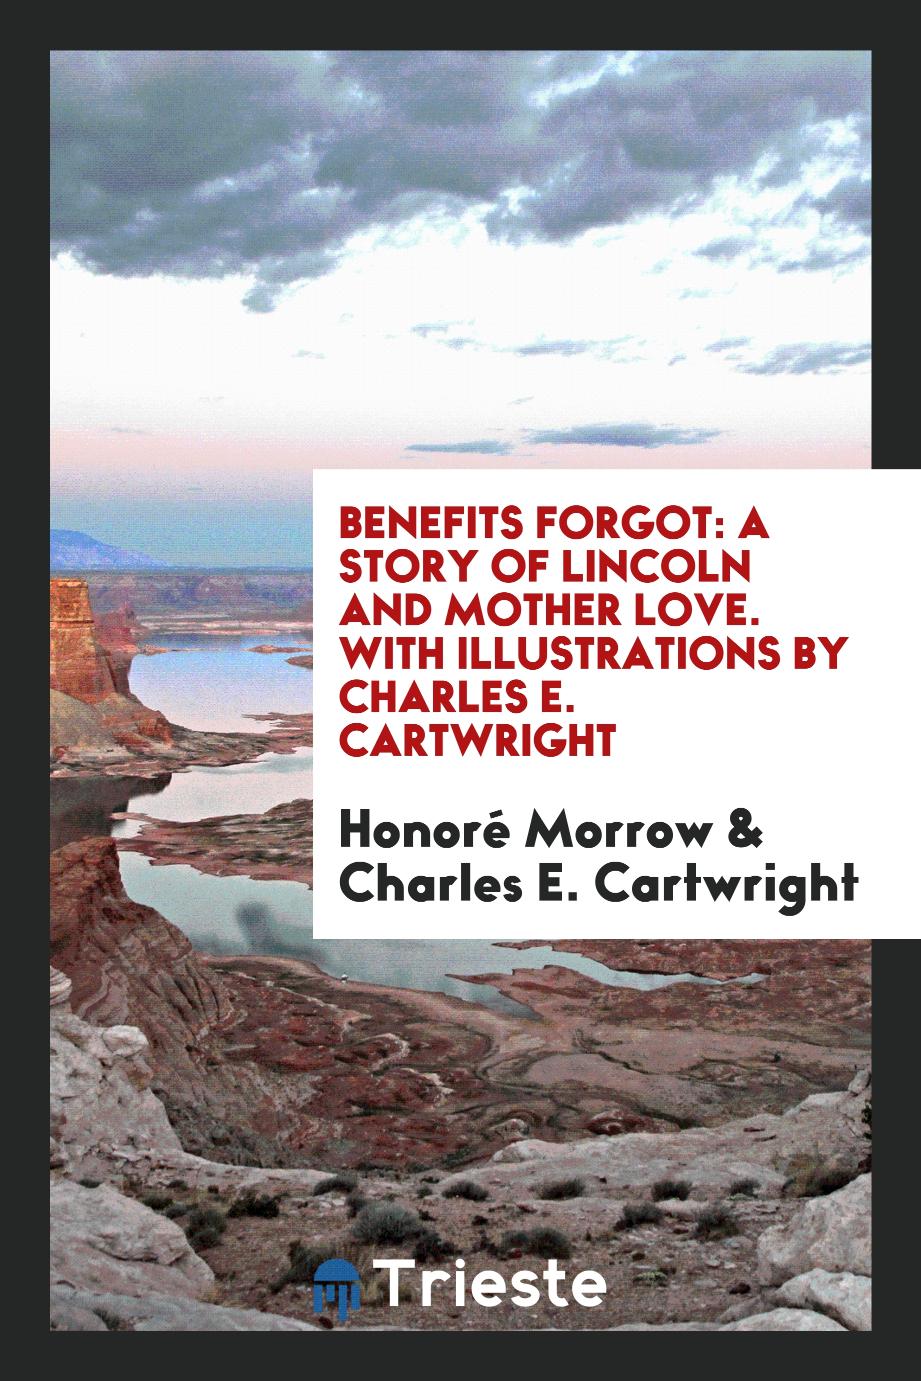 Benefits Forgot: A Story of Lincoln and Mother Love. With Illustrations by Charles E. Cartwright